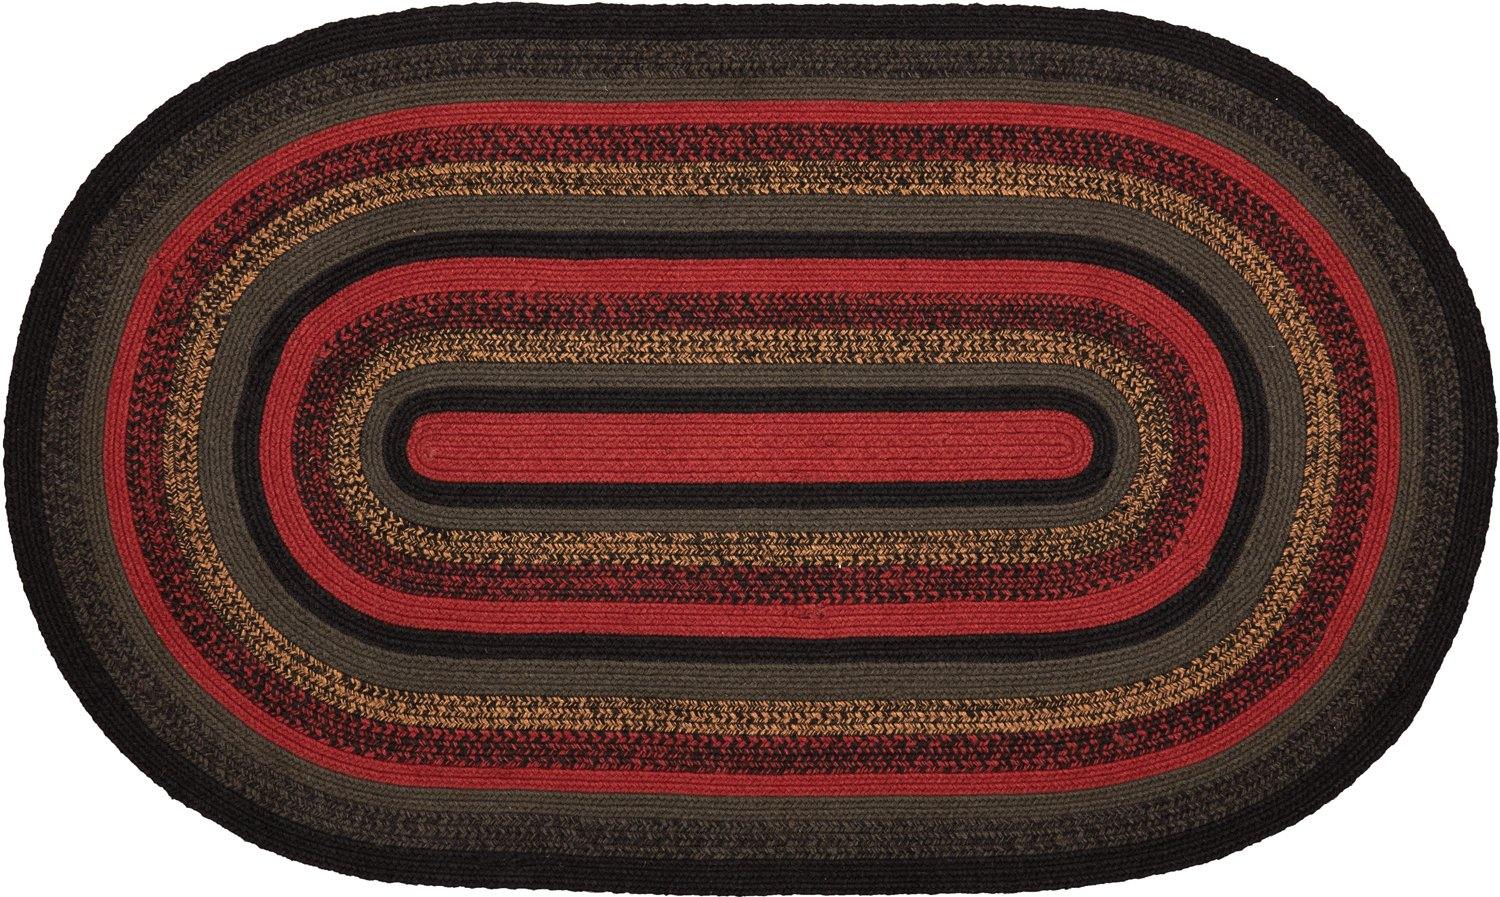 Cumberland Jute Braided Rug Oval 3'x5' with Rug Pad VHC Brands - The Fox Decor